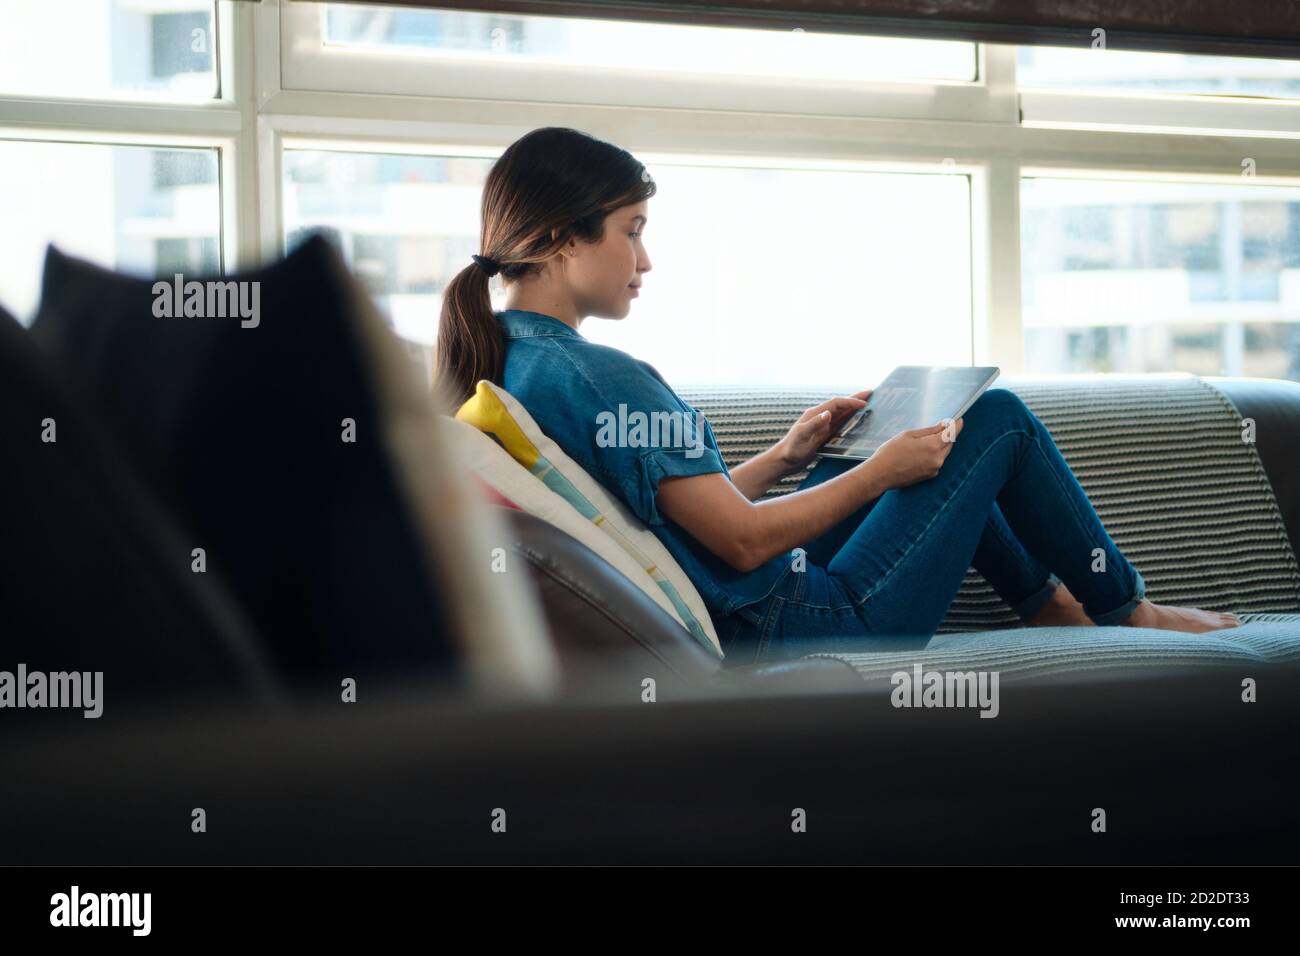 Woman Choosing Movie For Streaming On Tablet Computer Stock Photo